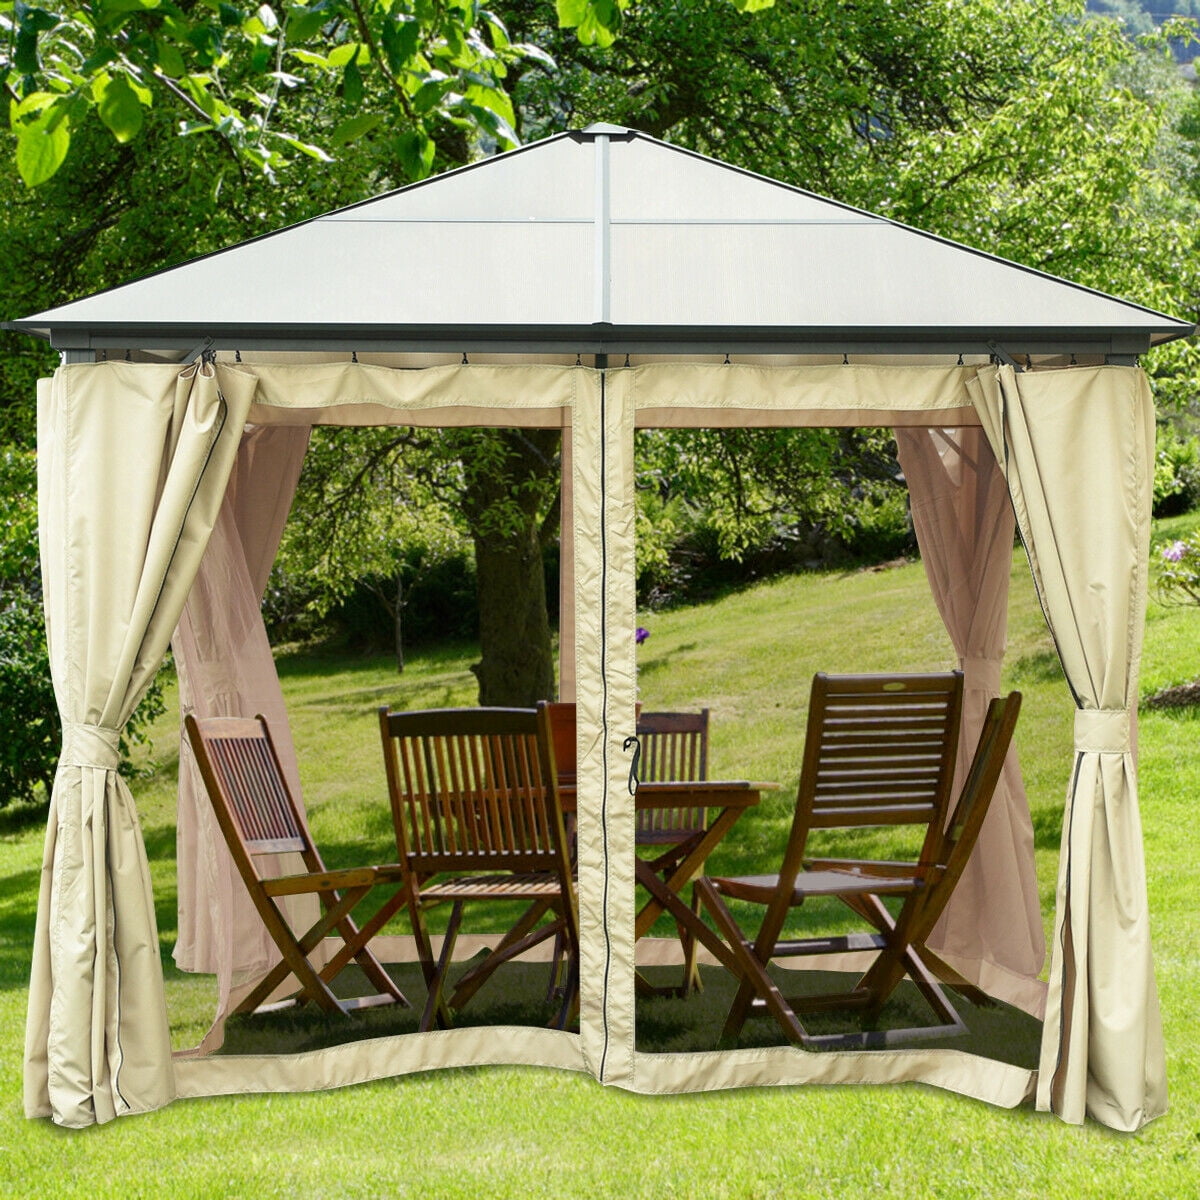 Gymax 10x 10 Gazebo Canopy Shelter Outdoor Patio Party Tent Awning